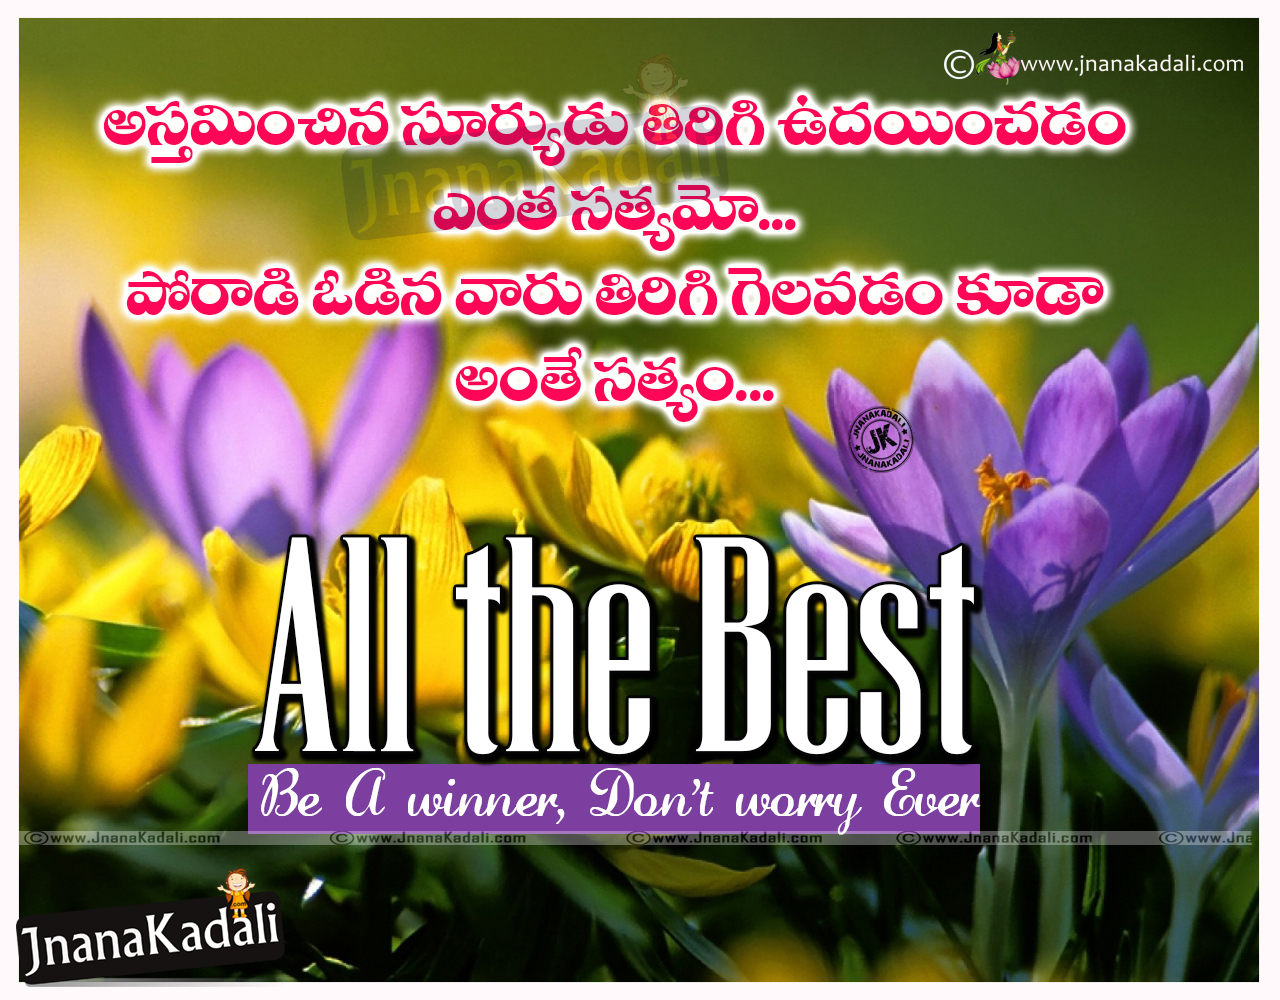 Inspirational All The Best Wishes Telugu Greetings SMS Quotes ...